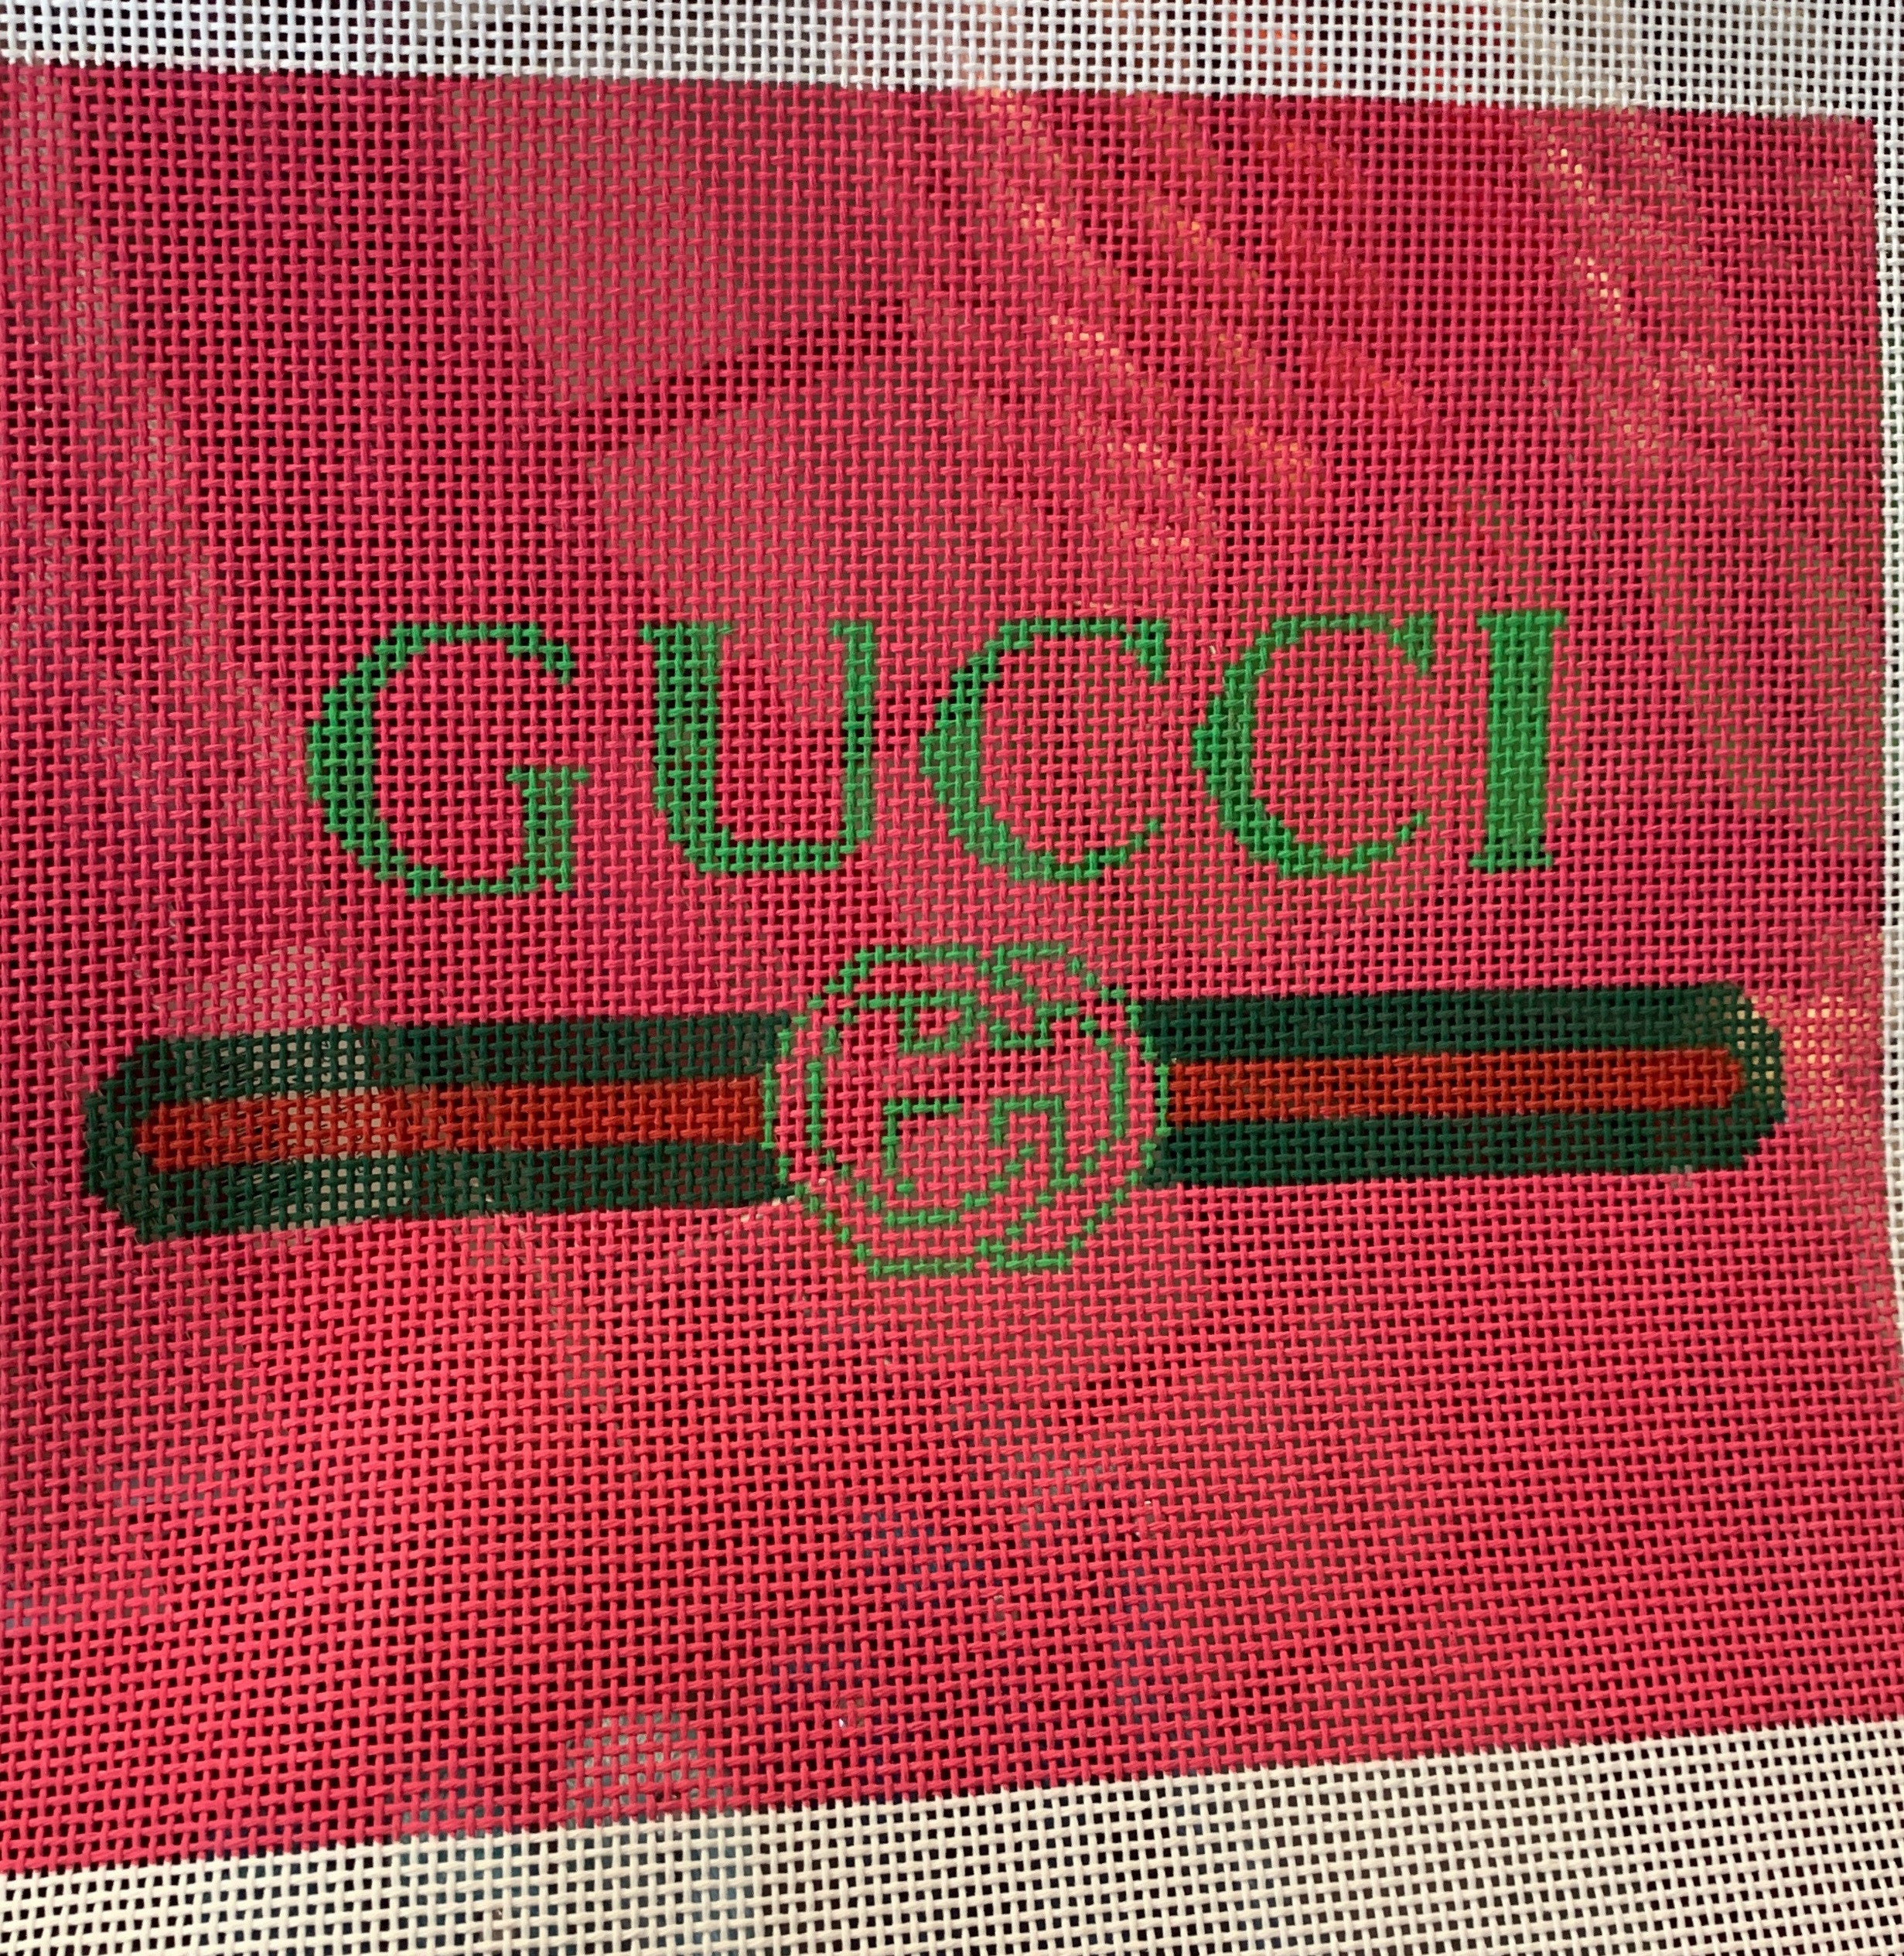 Alice abd Blue Gucci Canvas 13 mesh - Great for Pillow, Tray or Bag!